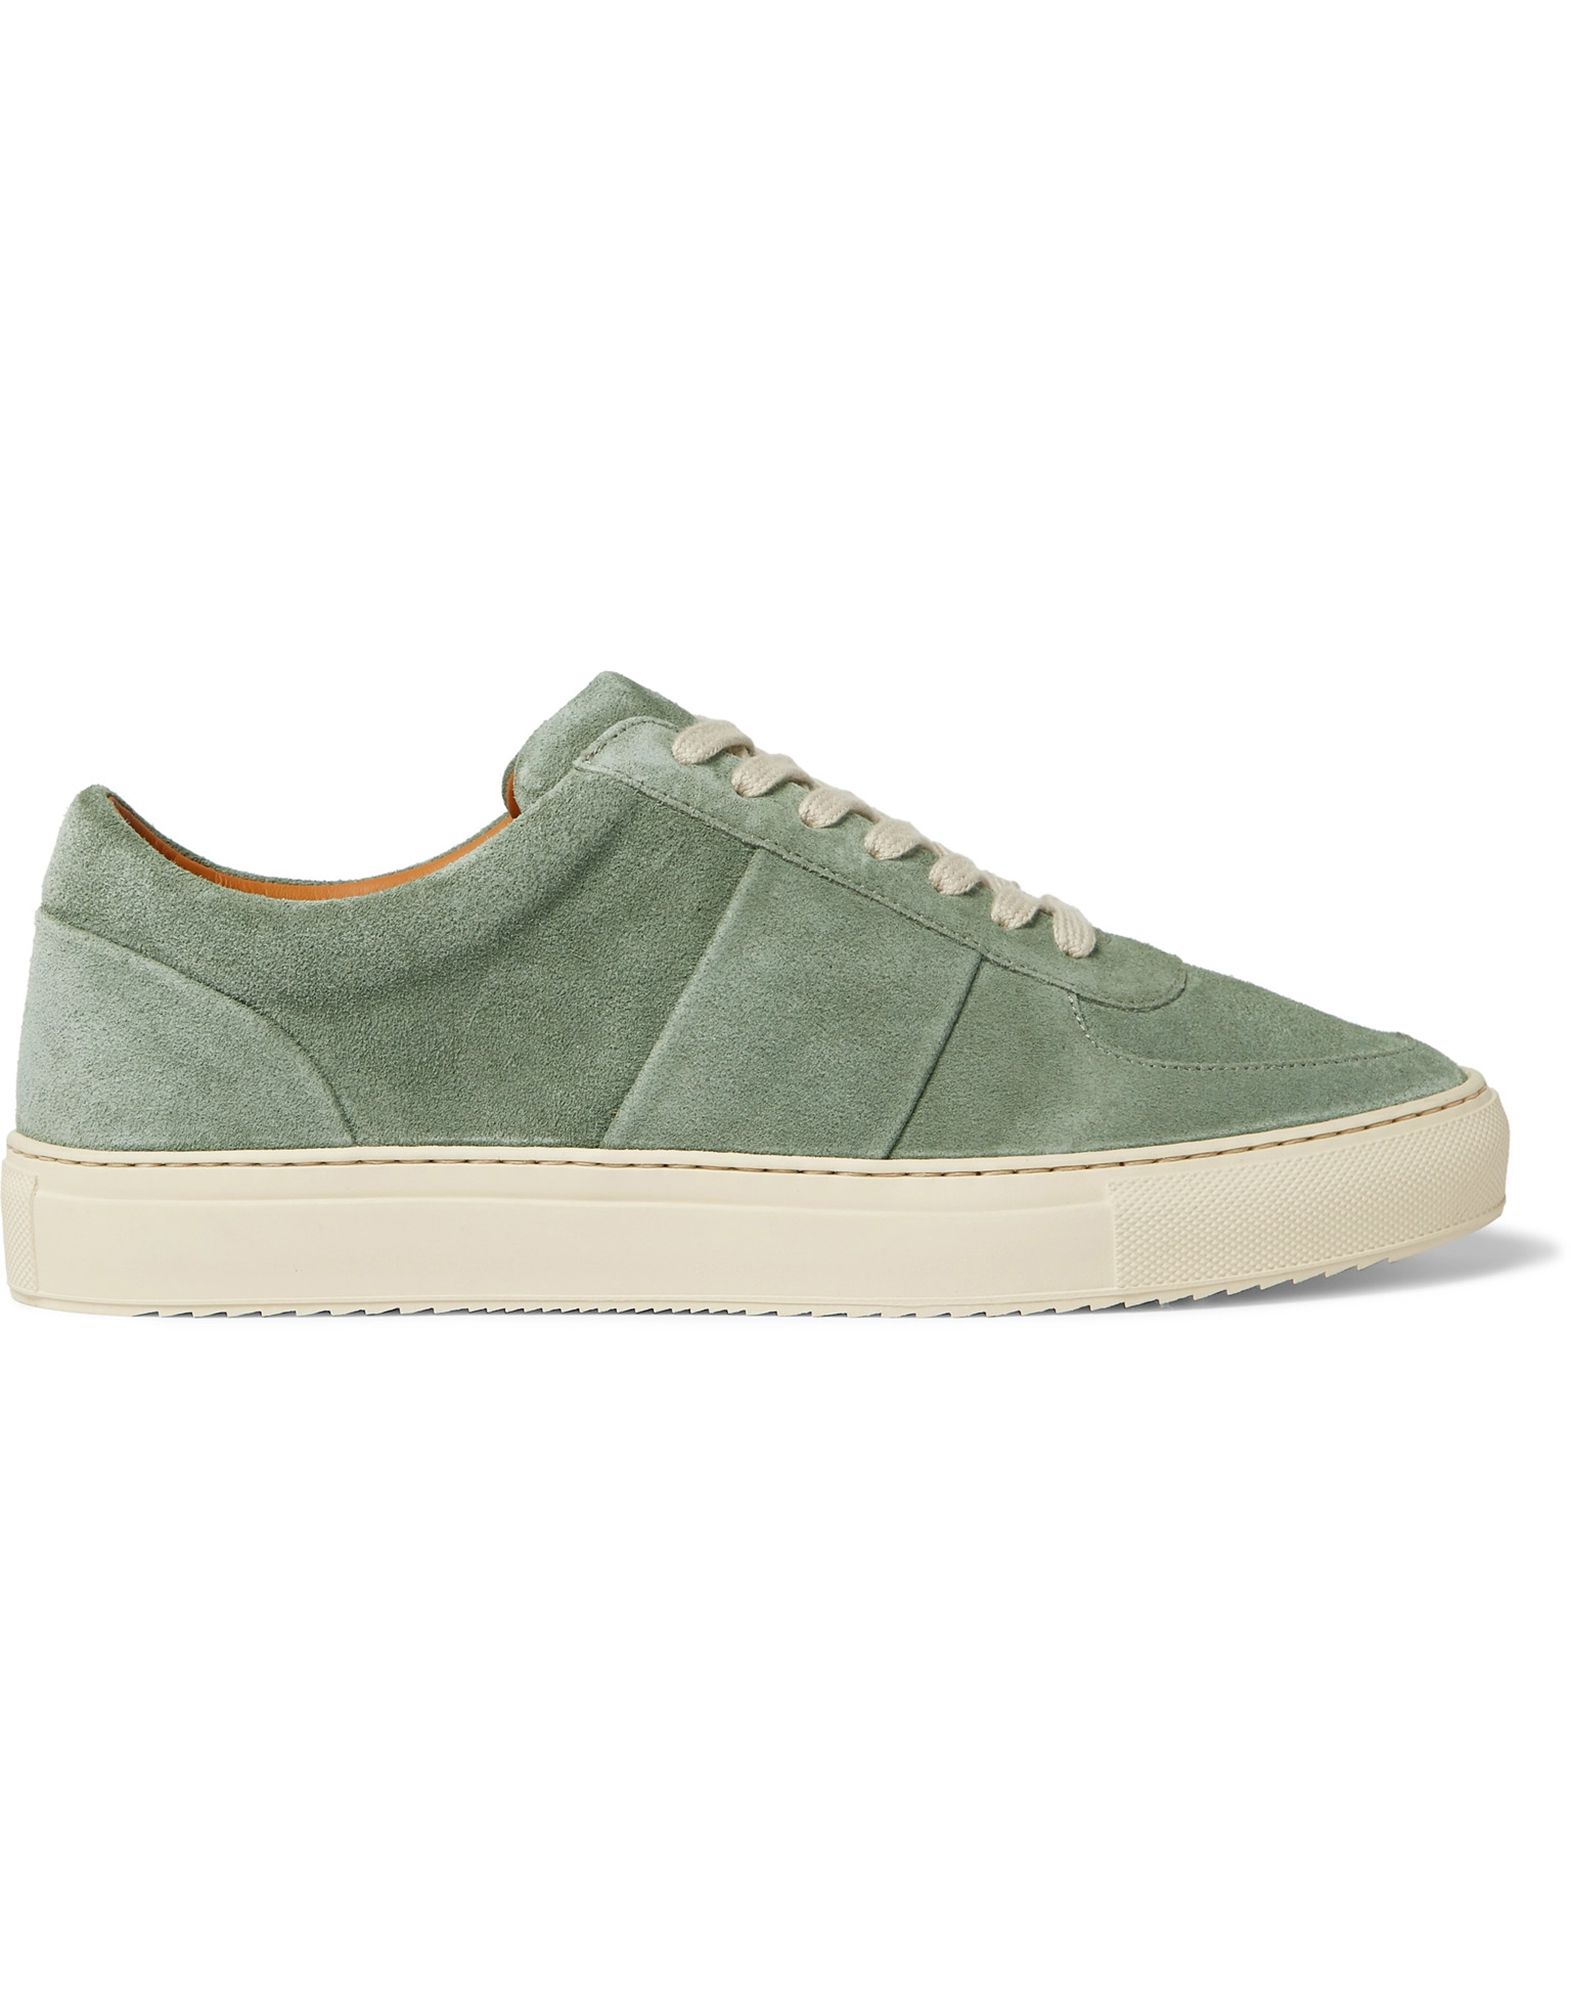 Mr P. Larry Regenerated Suede By Evolo® Sneakers In Light Green